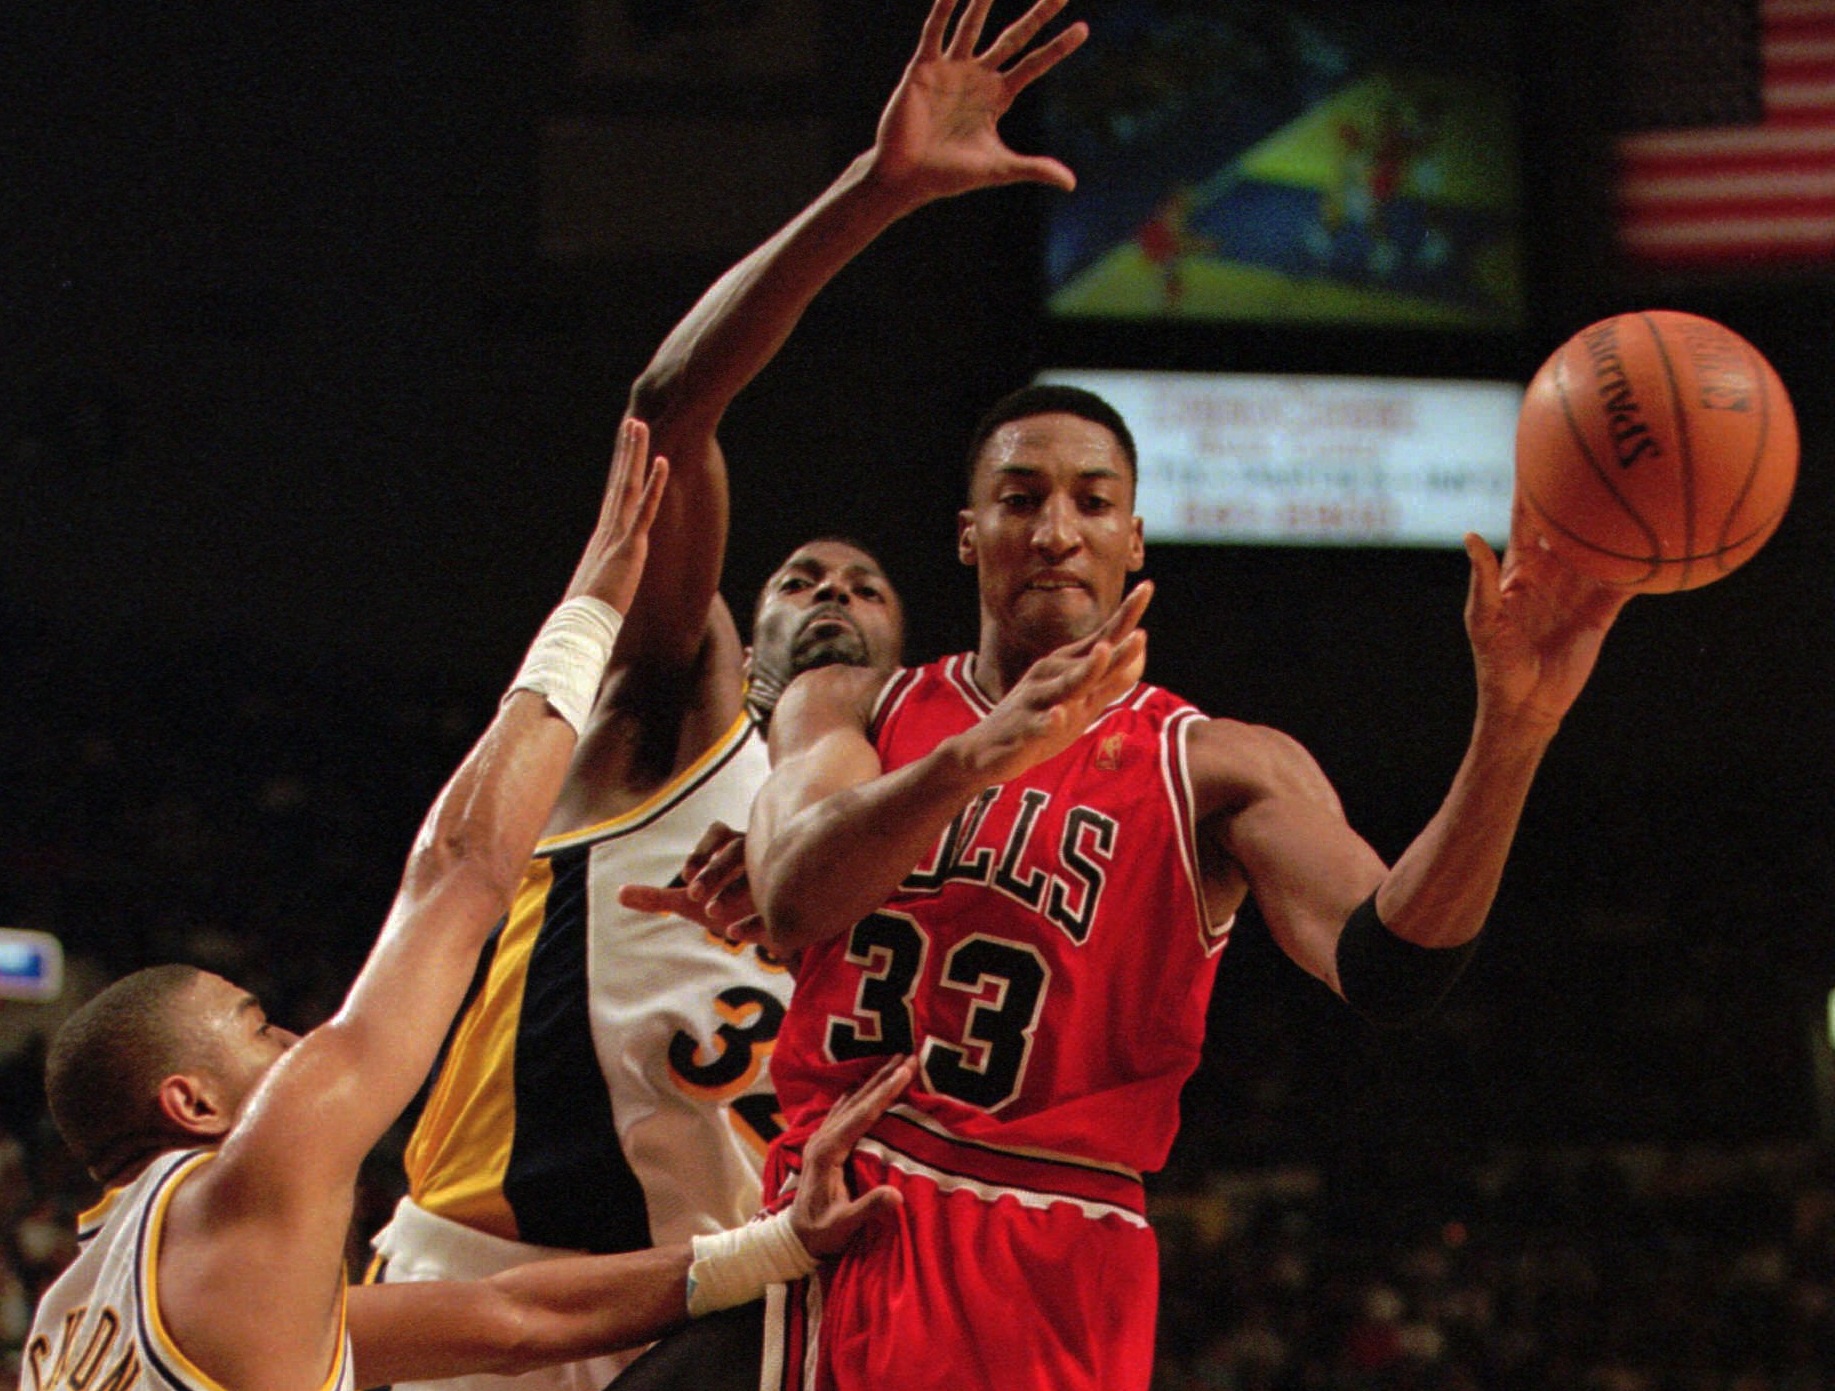 SOURCE SPORTS: Scottie Pippen Confronted Micheal Jordan About His Portrayal in ‘The Last Dance’